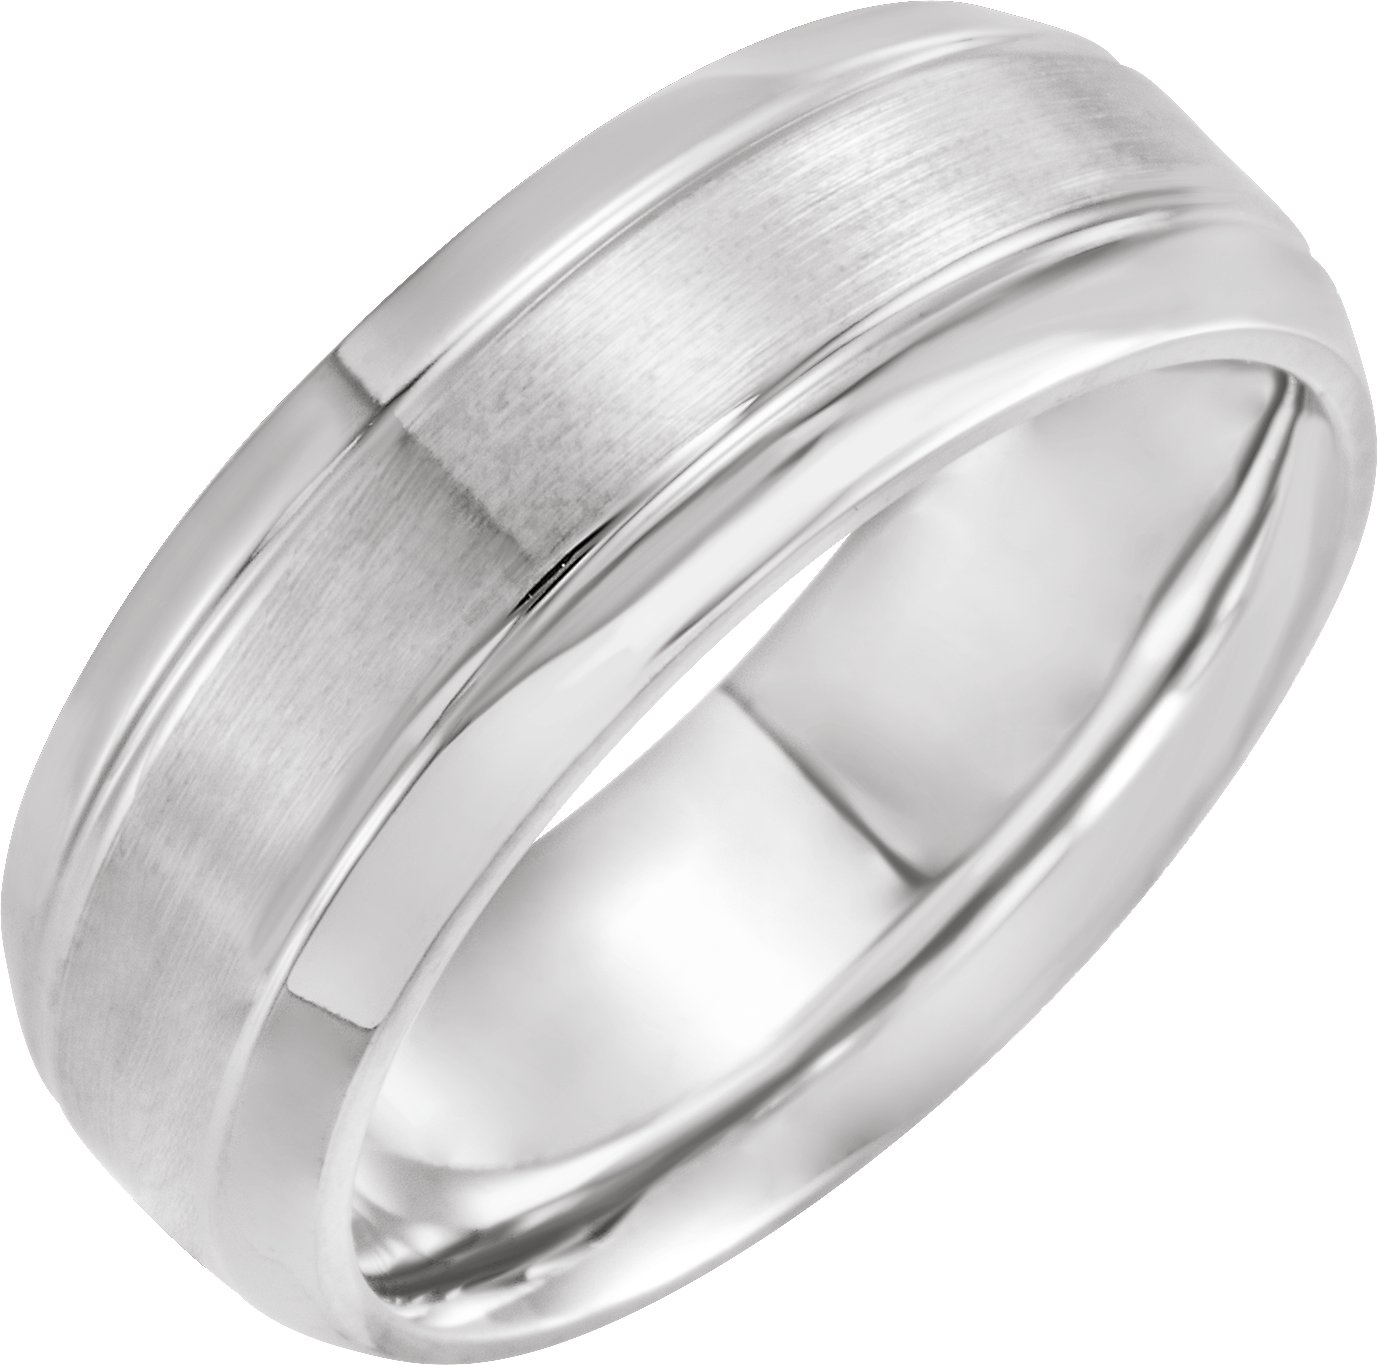 Continuum Sterling Silver 8 mm Grooved Beveled Edge Band Size 7 Ref 16265656